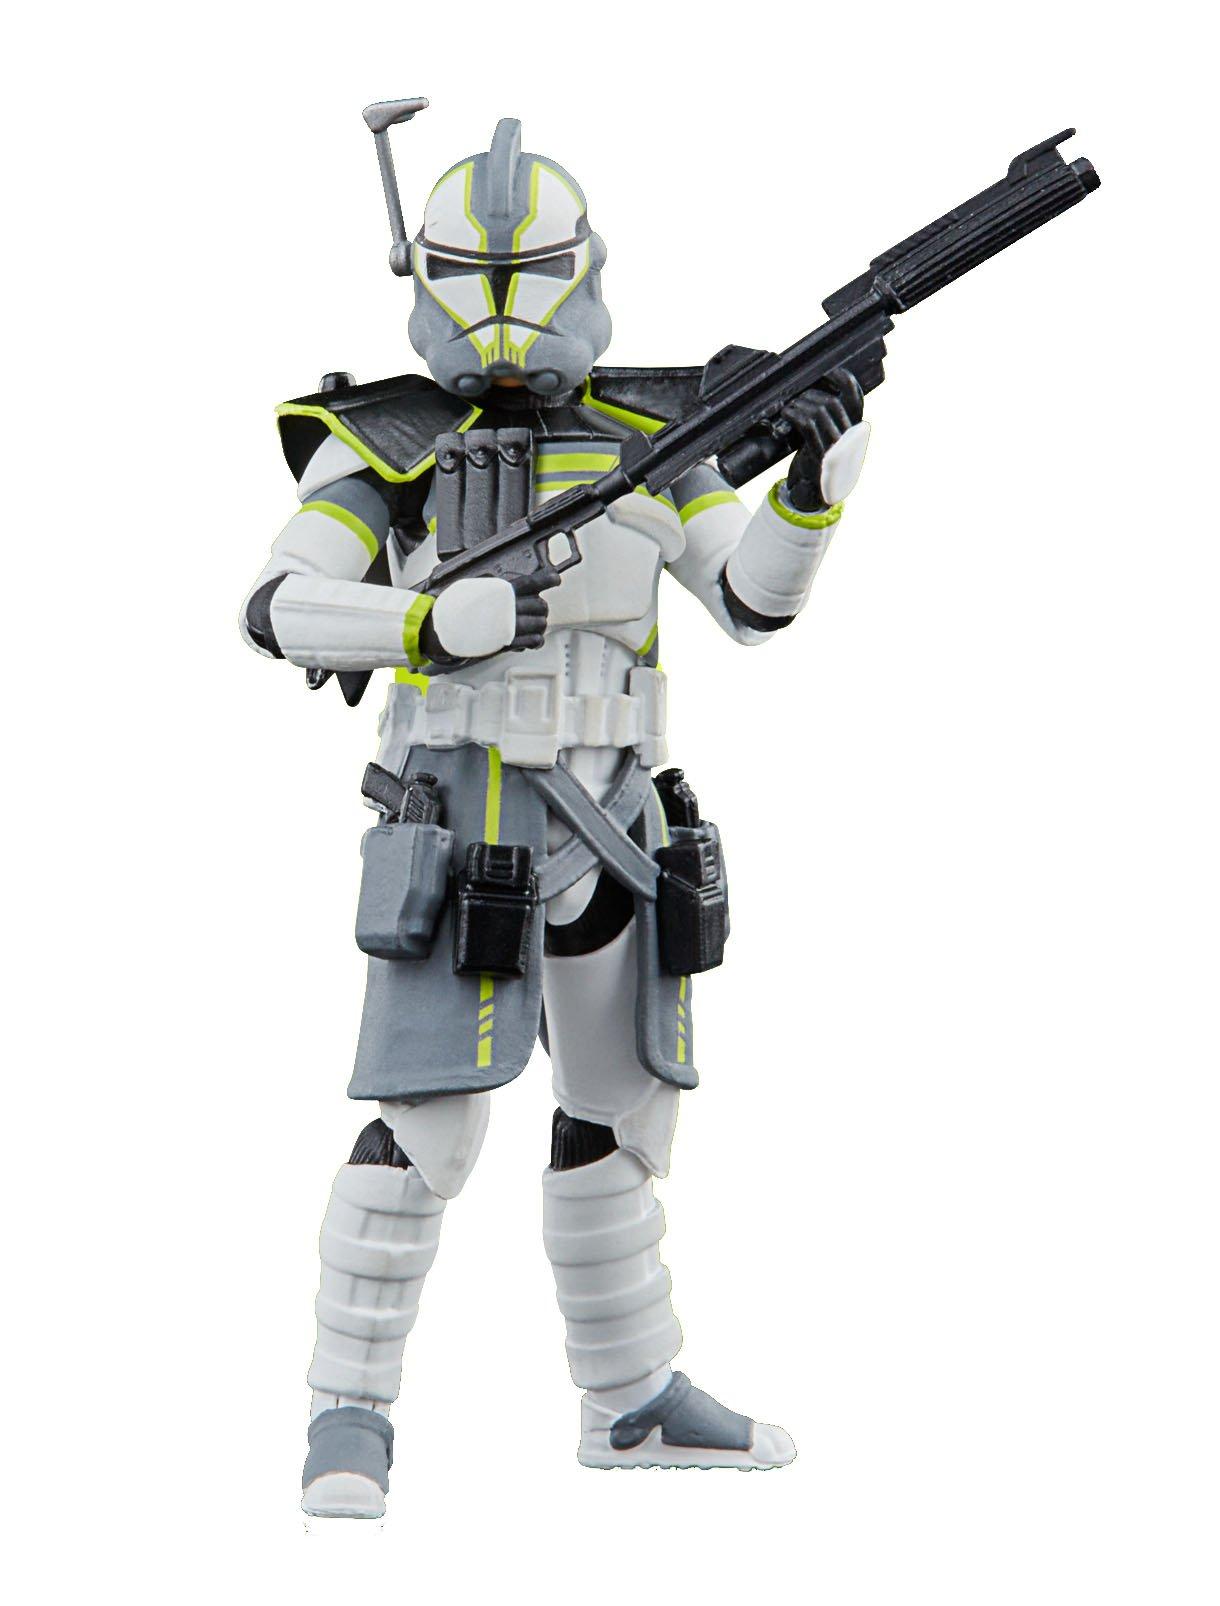 Star Wars The Vintage Collection ARC Trooper Echo Toy, 3.75-Inch-Scale Star  Wars: The Clone Wars Figure, Ages 4 and Up - Star Wars